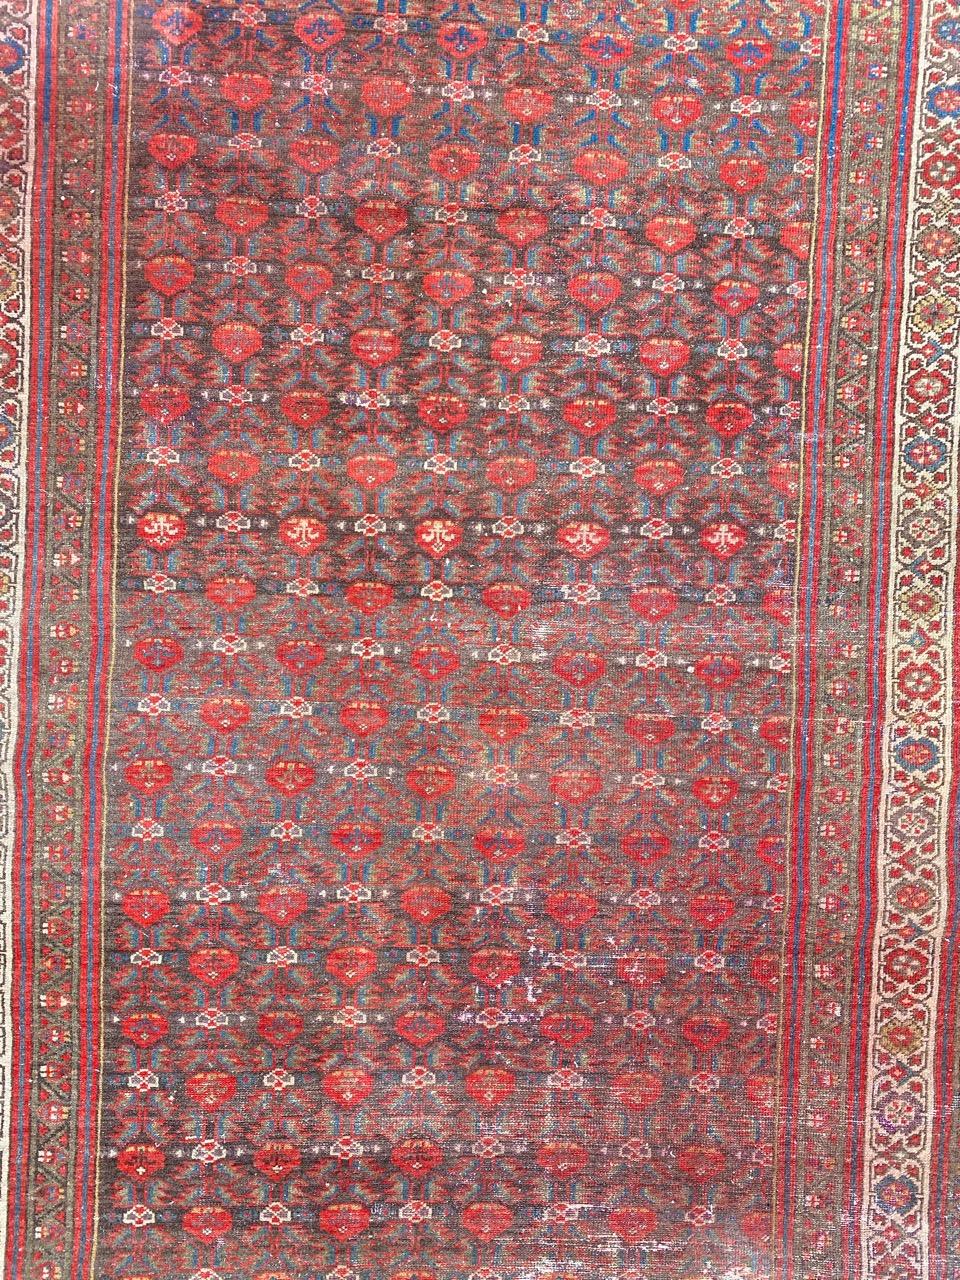 Antique Malayer rug with nice stylized floral design and beautiful natural colors, entirely hand knotted with wool velvet on cotton foundation.

✨✨✨
